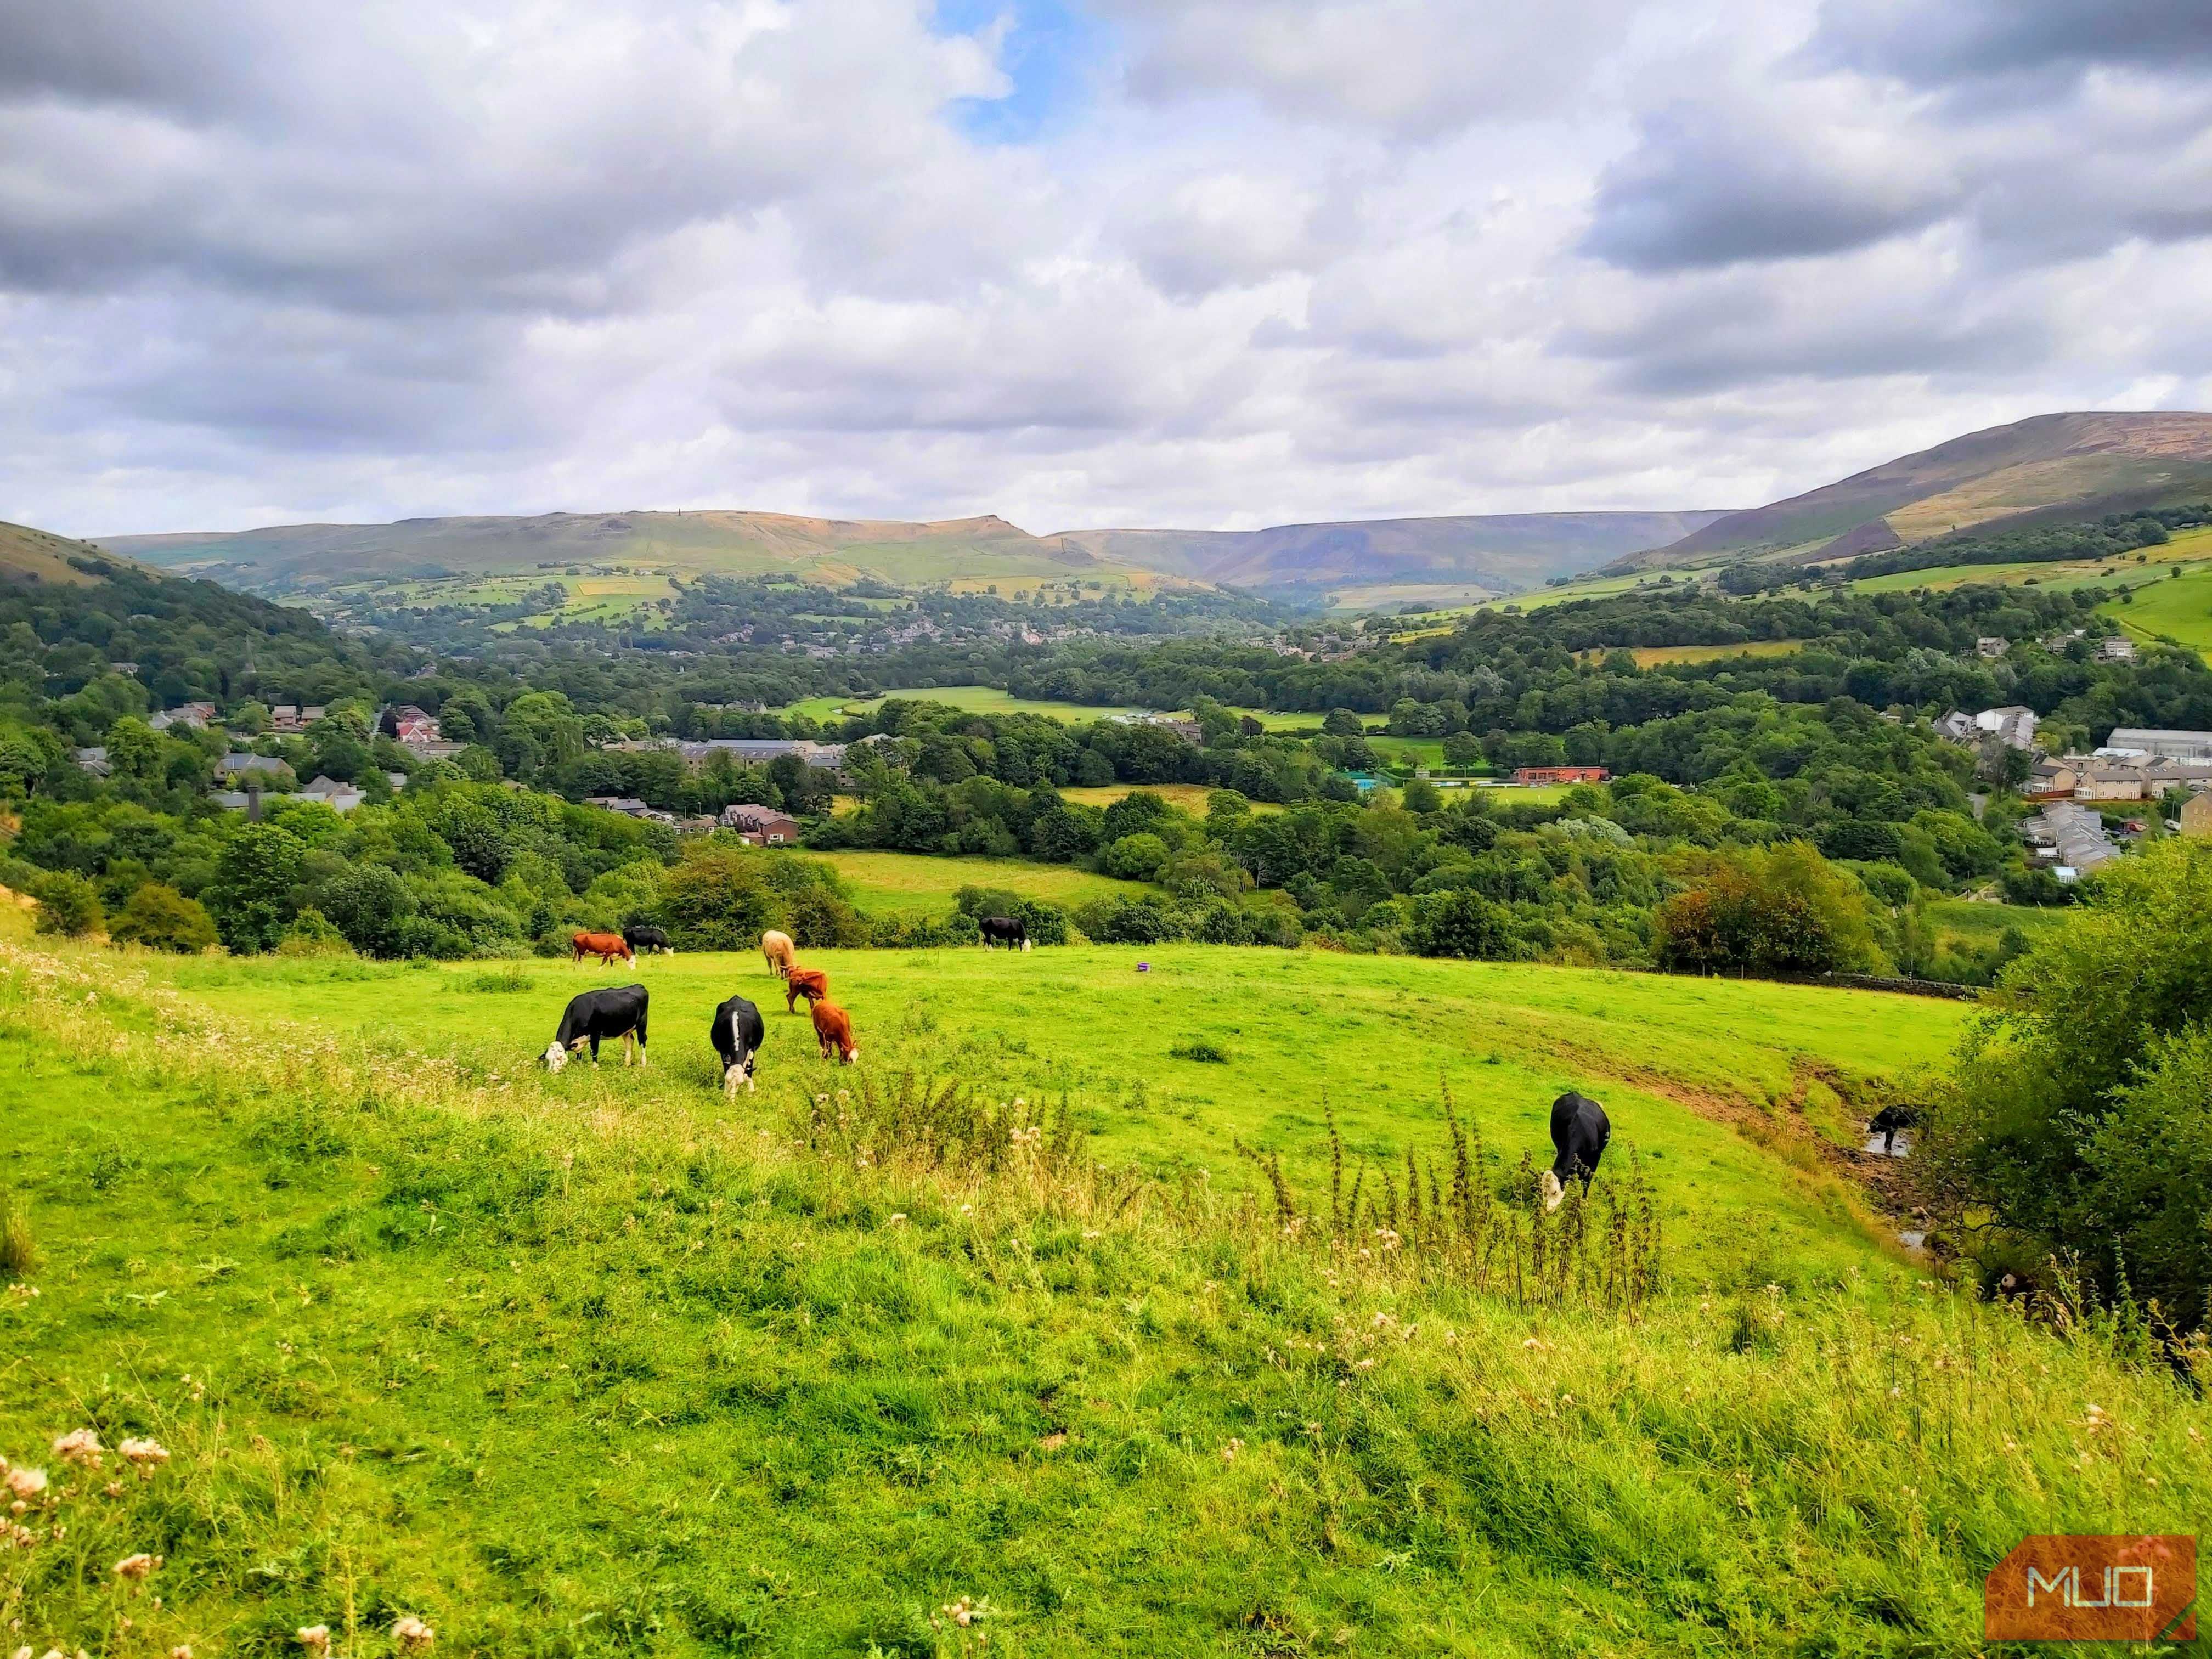 A view of Saddleworth, with the saturation adjusted